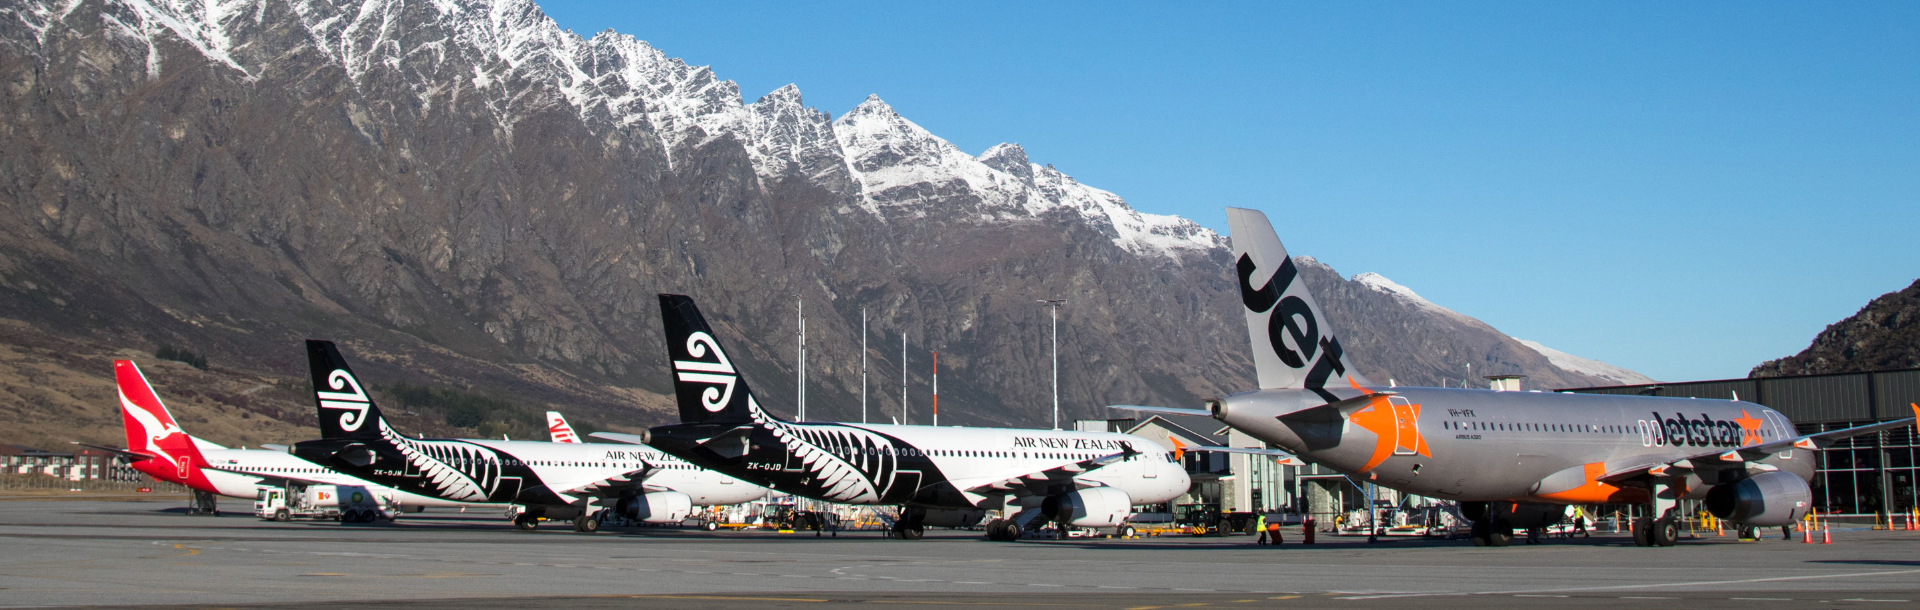 Planes on the tarmac at Queenstown Airport. Image courtesy Queenstown Airport